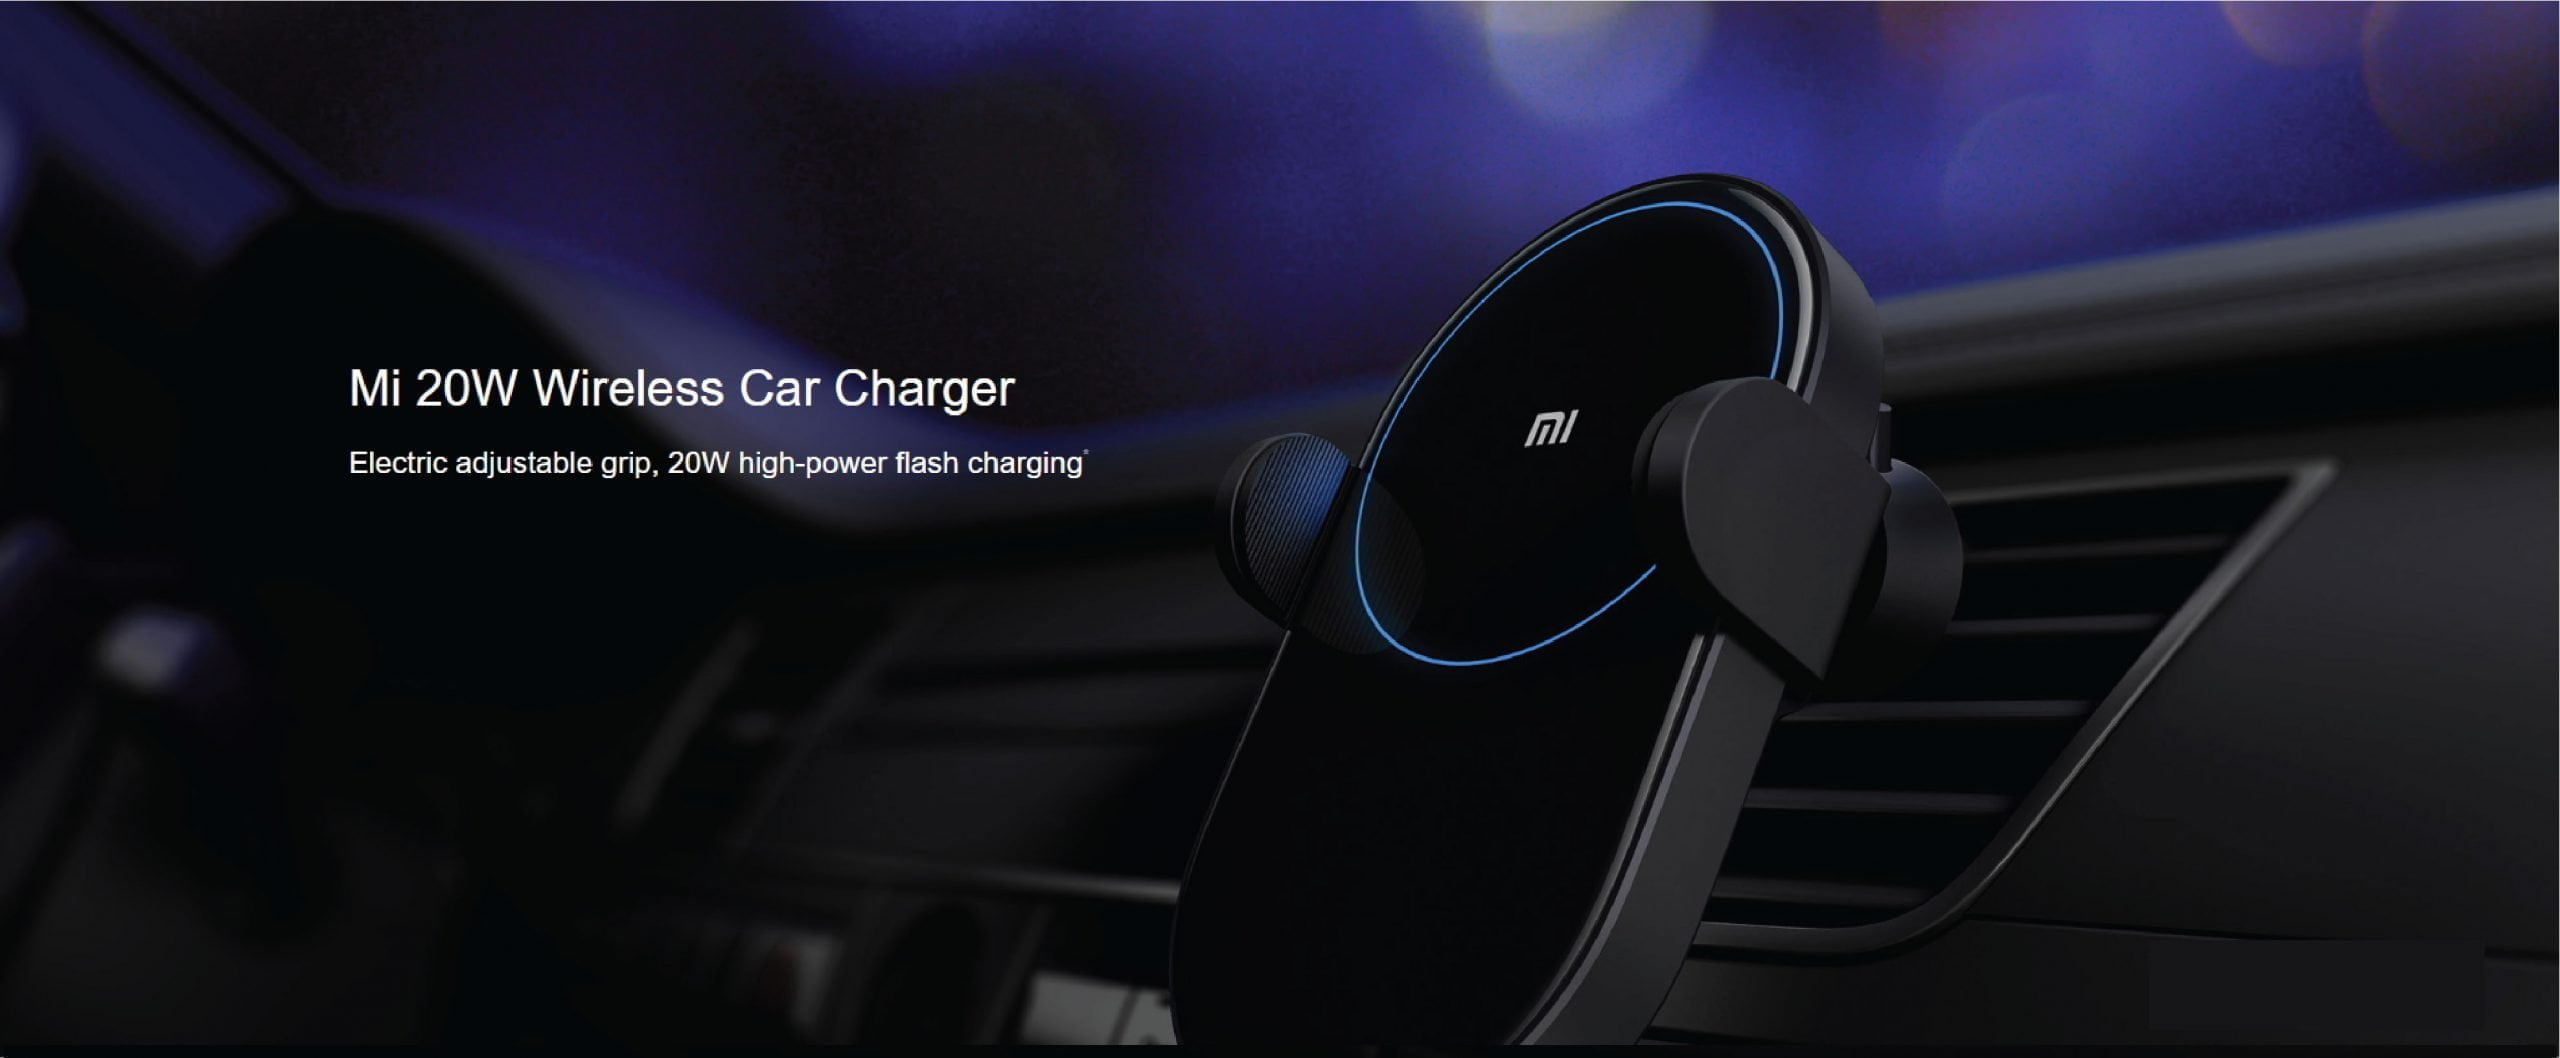 Untitled 1 01 Scaled Https://Lablaab.com/Product/8873/ Https://Lablaab.com/Product/Xiaomi-Wireless-Car-Charger-20W-Max-Power-Inductive-Electric-Clamp-Arm-Double-Heat-Dissipation-Fast-Charging-Black/ شاومي ، طقم كاميرا شاومي مي سفير وشاحن سيارة لاسلكي شاومي مي بقوة 20 واط – أسود مجموعة كاميرات شاومي مي سفير وشاحن السيارة اللاسلكي شاومي مي 20 وات - أسود